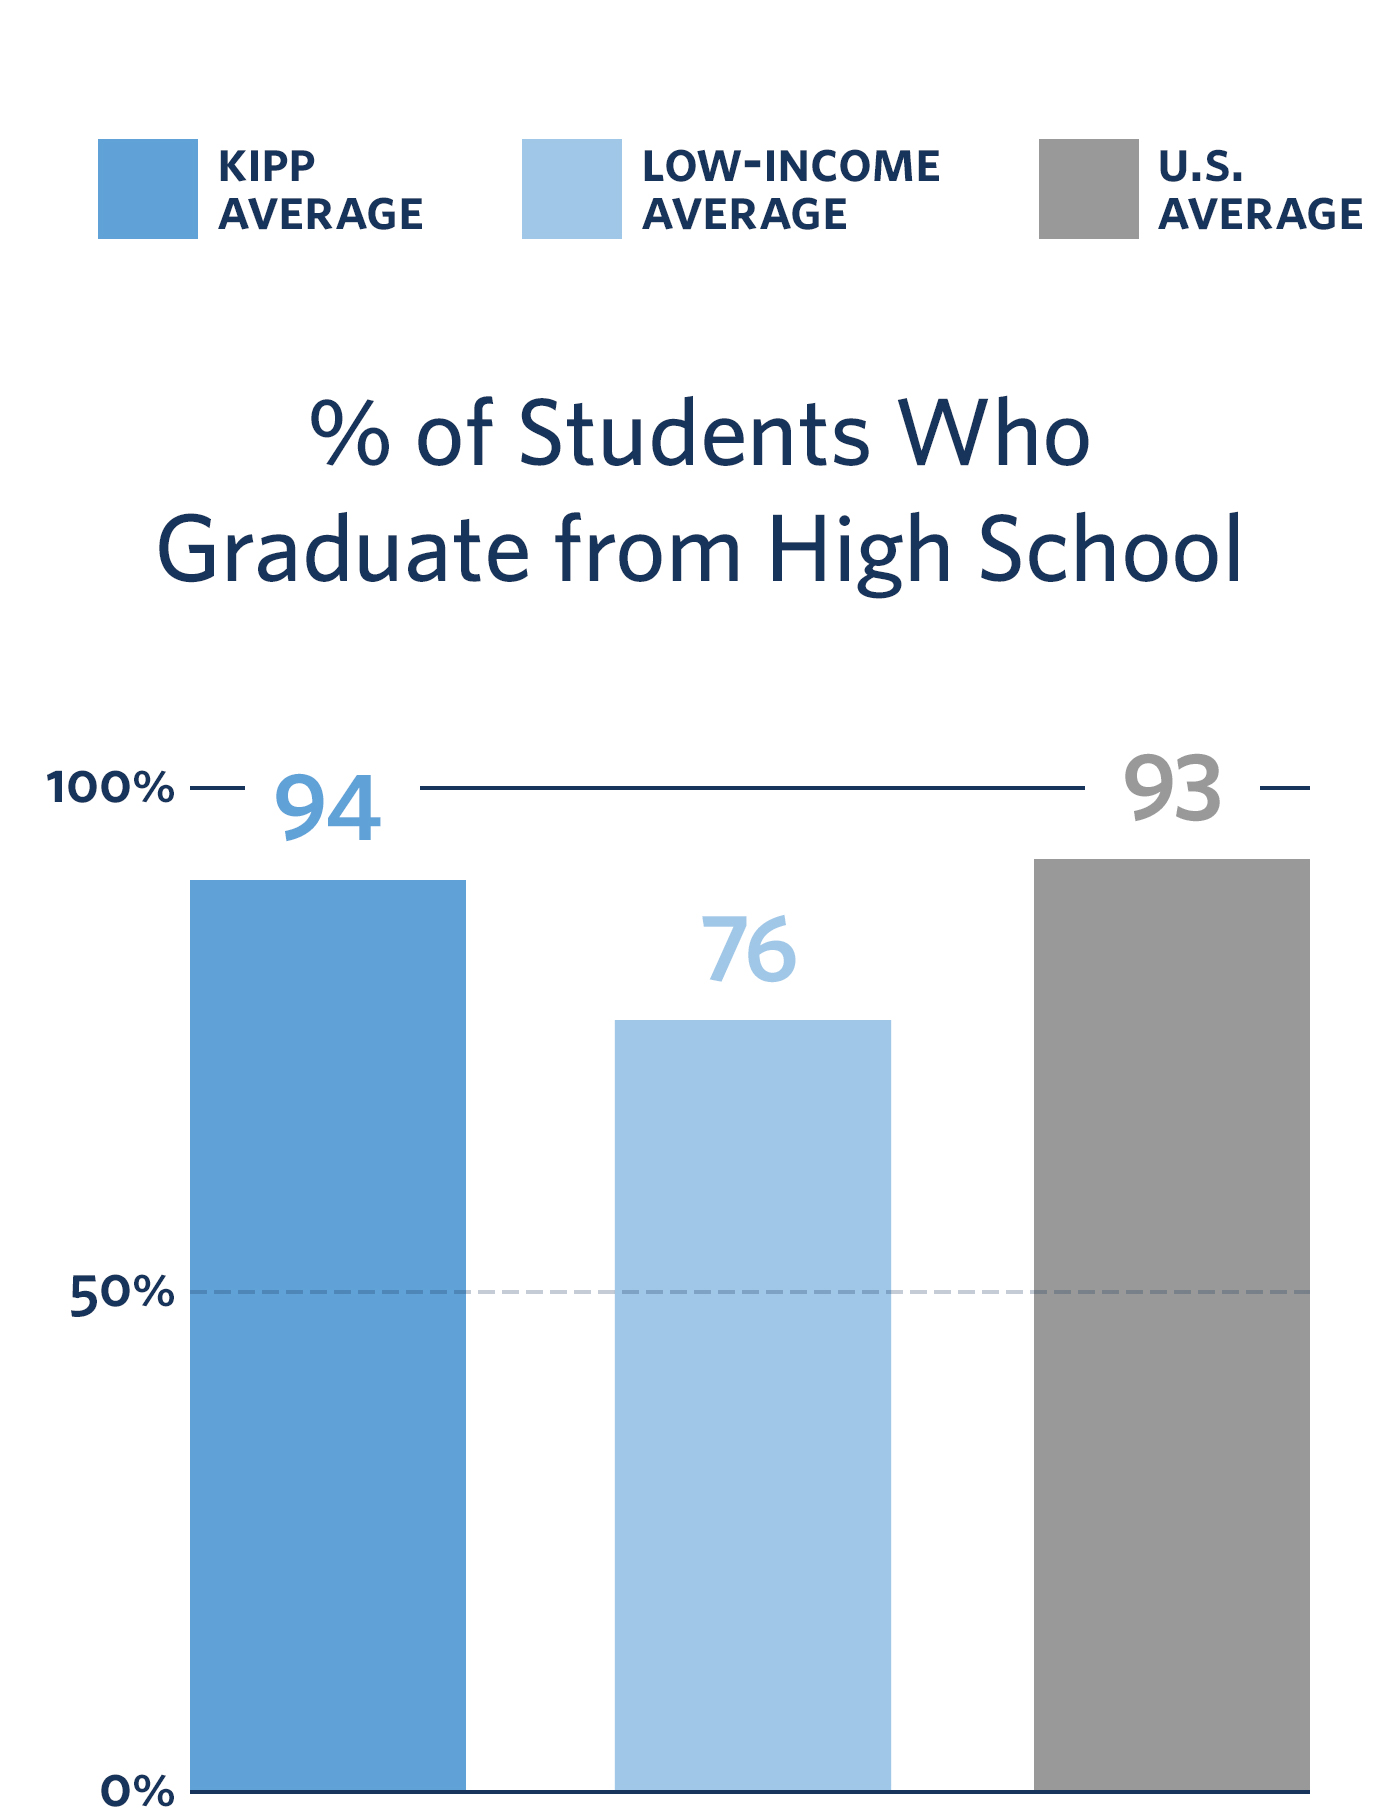 Percentage of Students Who Graduate from High School: 91% KIPP Average, 76% Low-Income Average, 93% U.S. Average